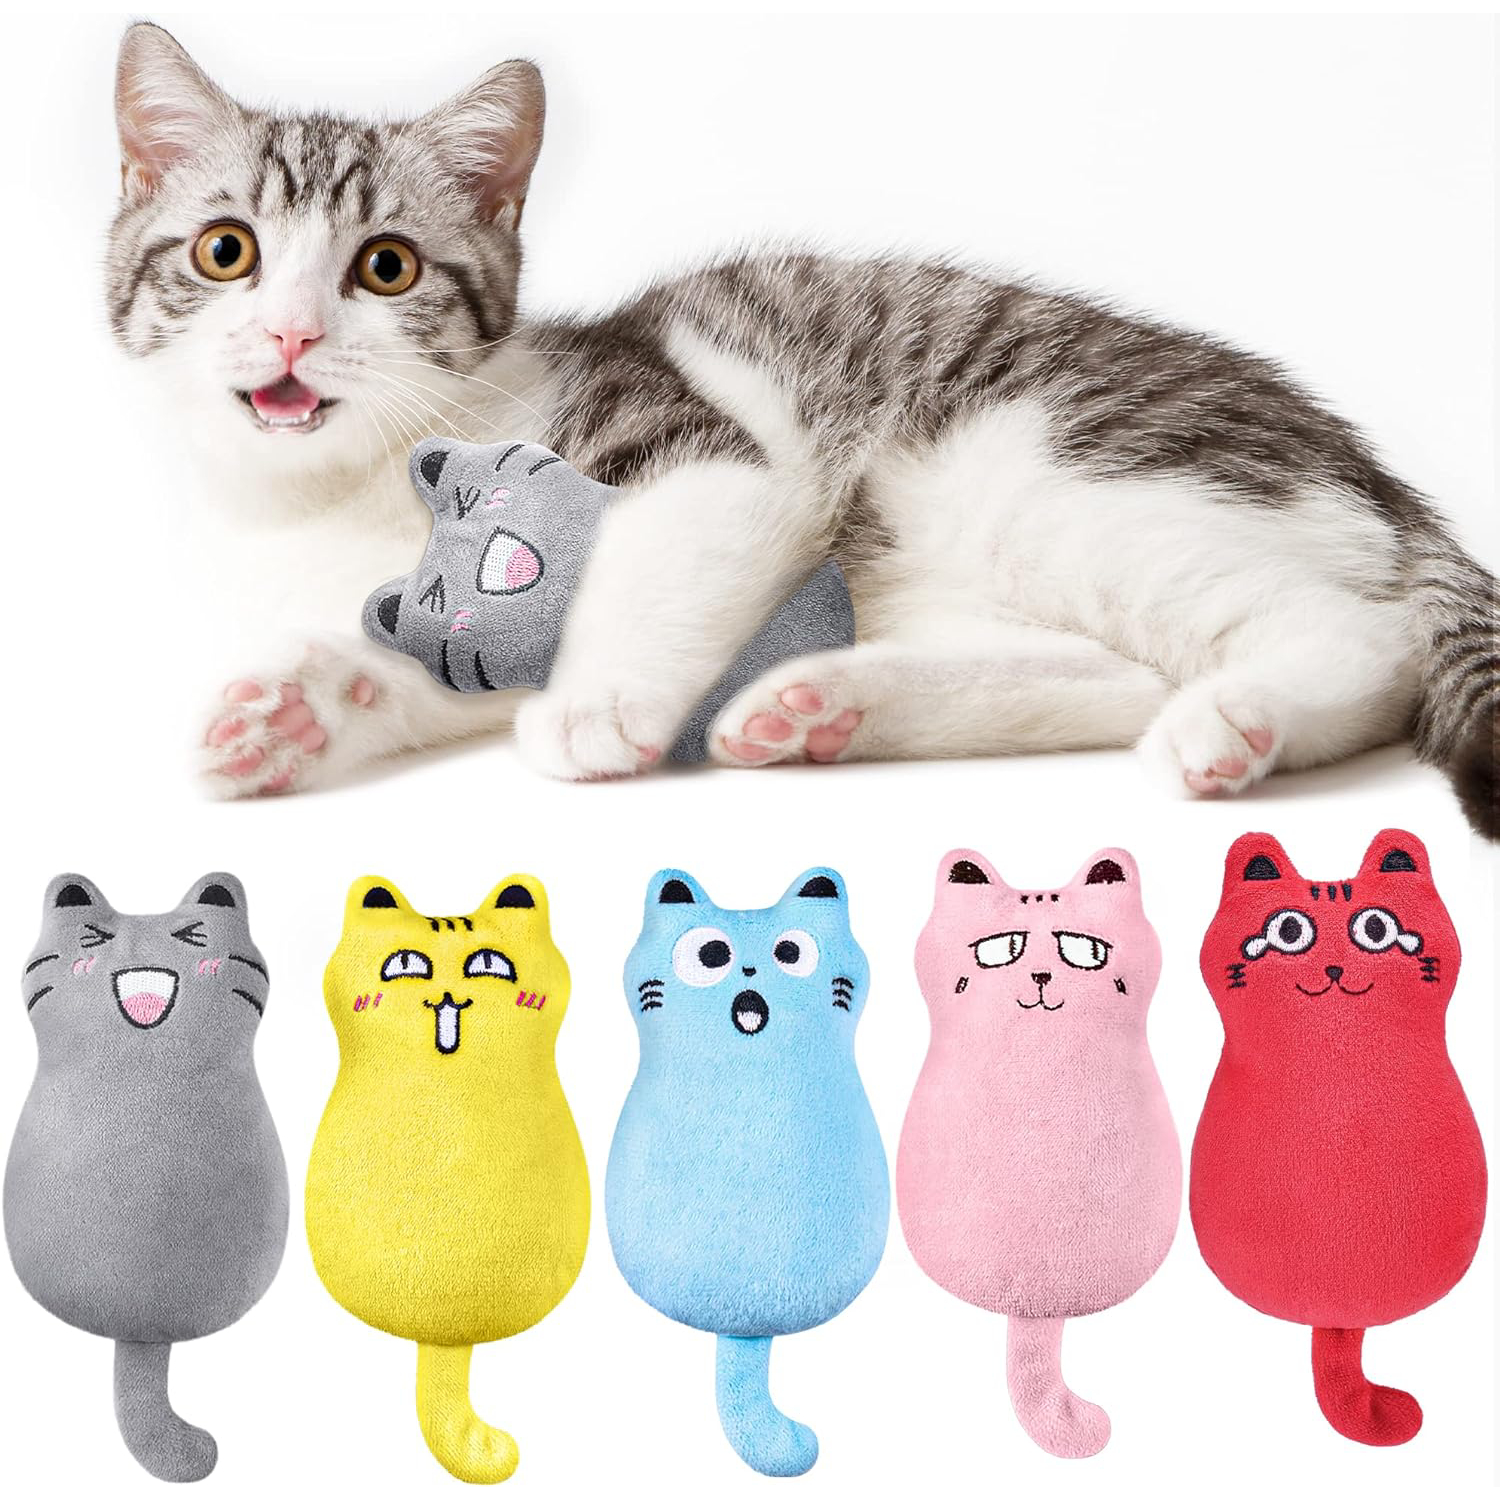 Feeko 5Pcs Catnip Toys, Cat Pillow Toys, Rattle Sound, Cat Toys for Indoor Cats Interactive with Cute Cat Toy Set, Cat Teething Chew Toy, Bite Resistant Catnip Toys Plush Gift new